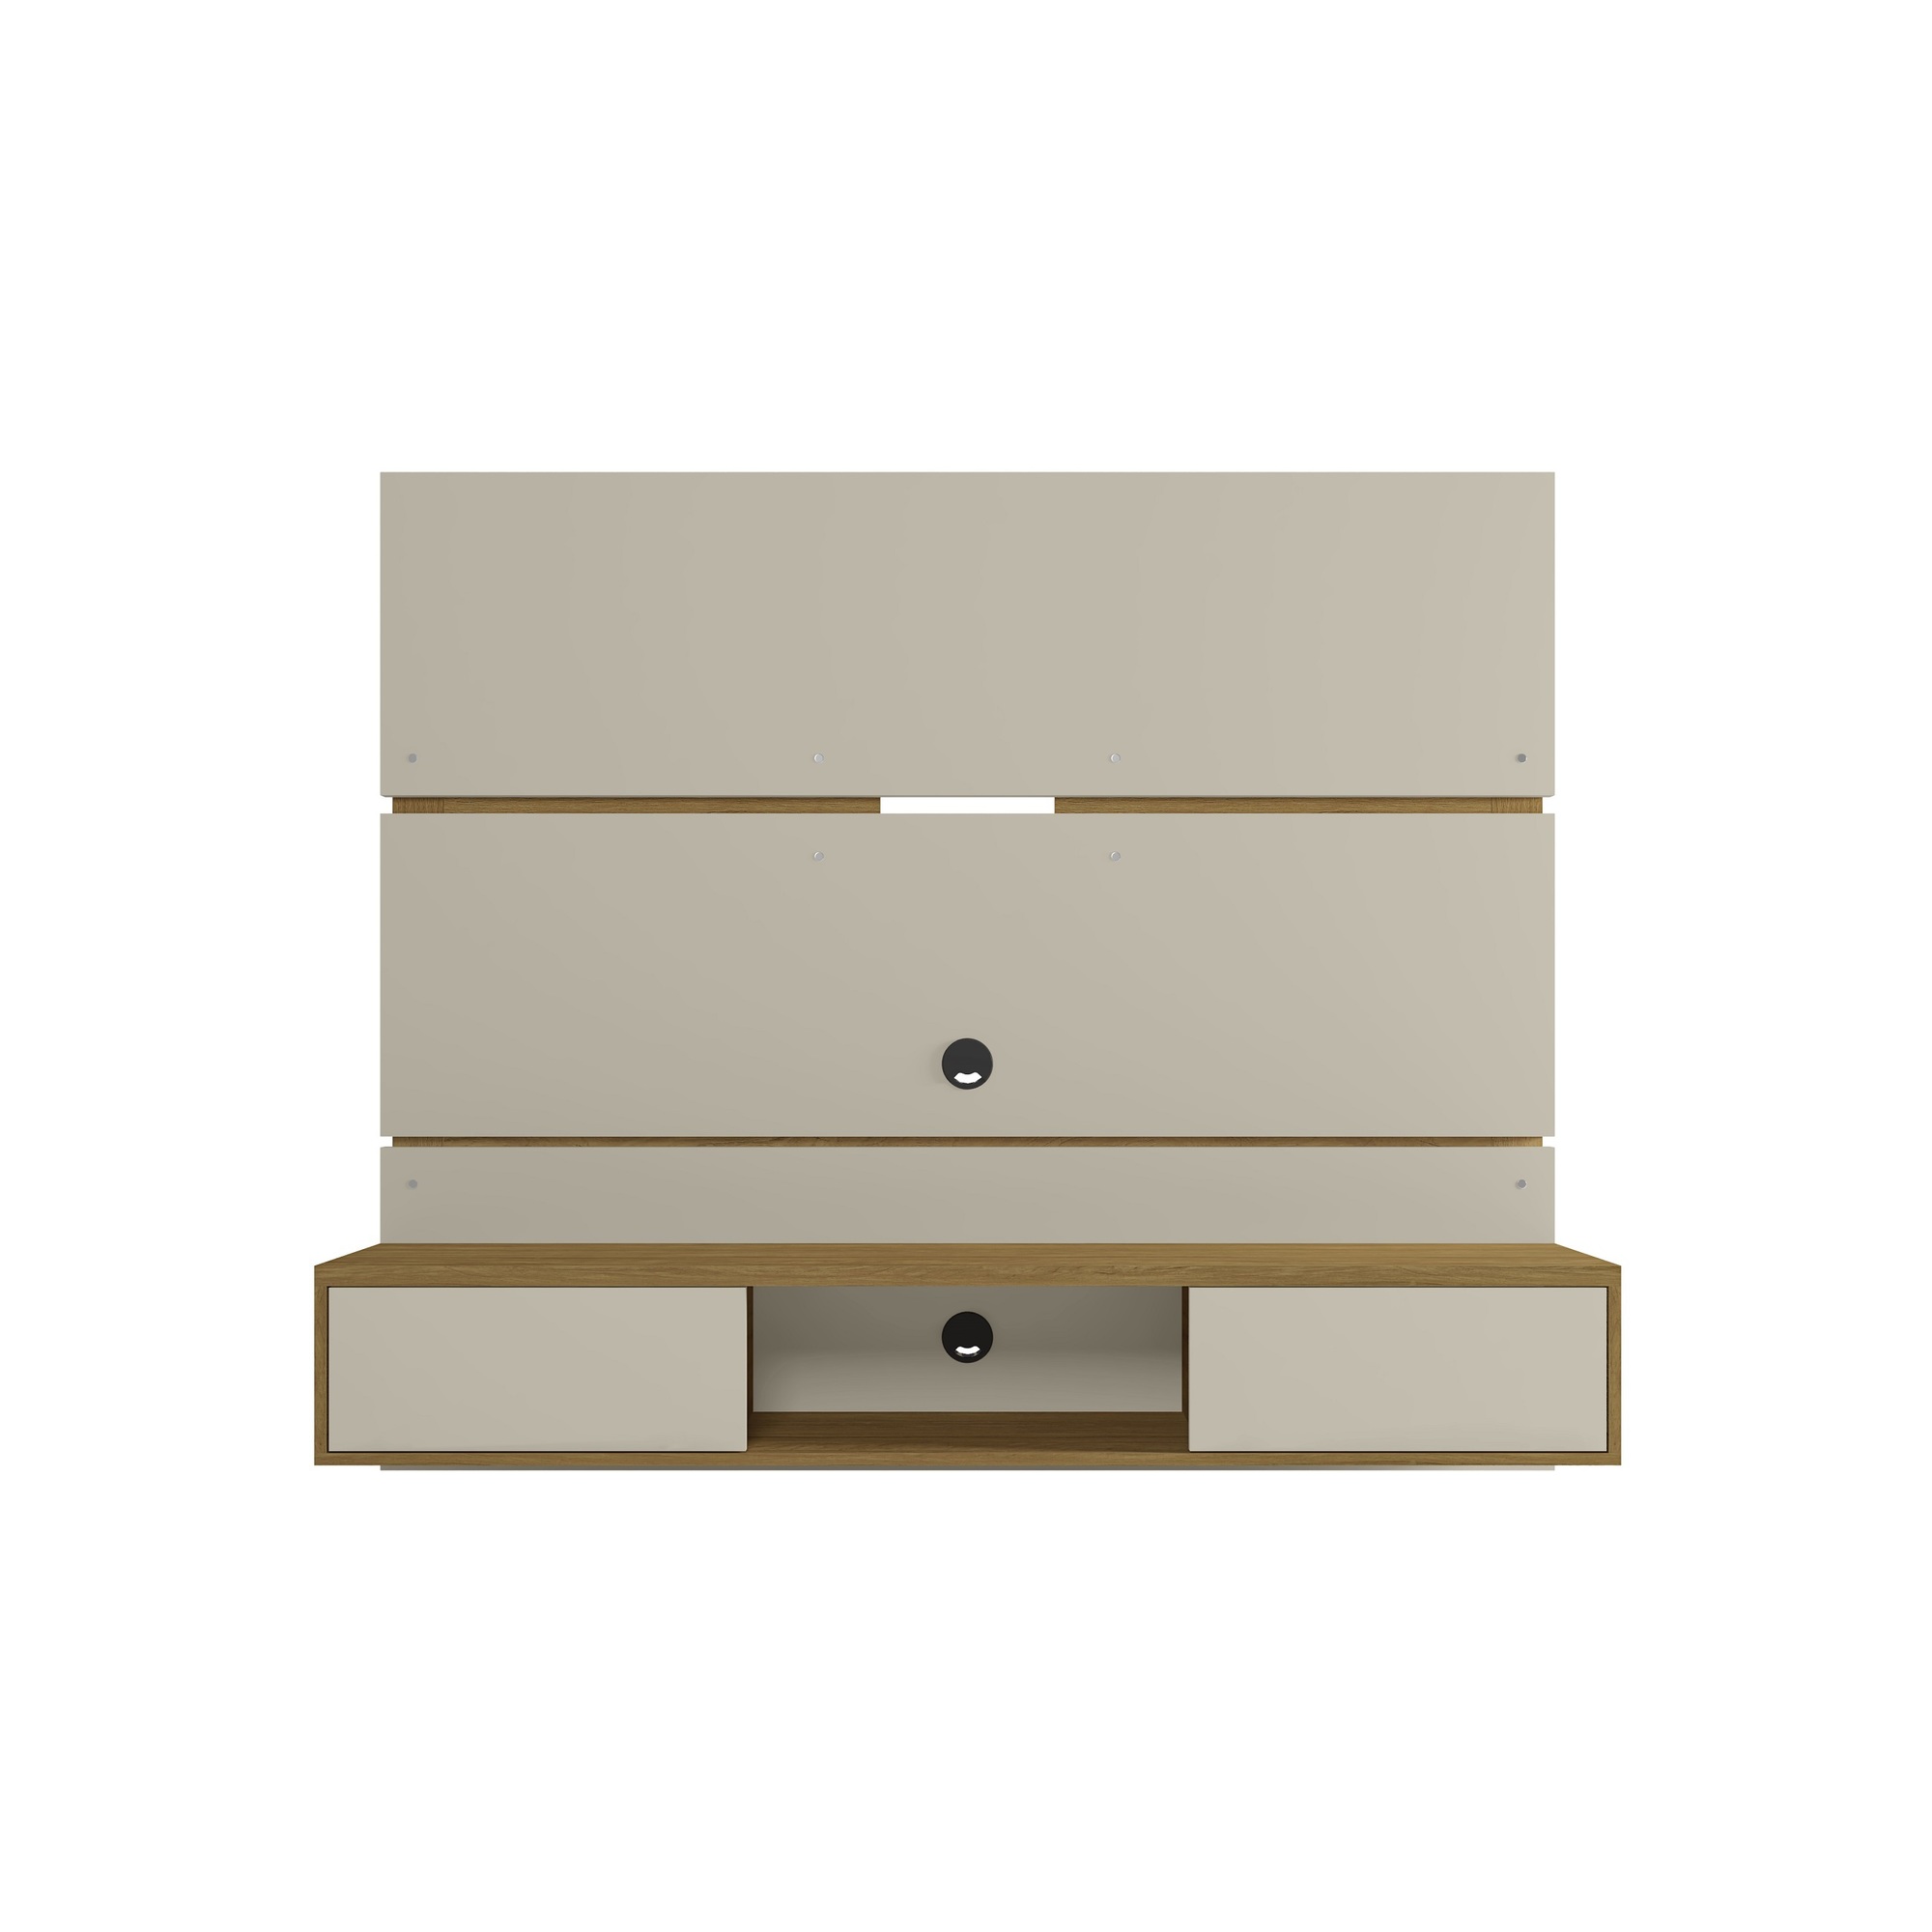 Manhattan Comfort, Vernon 62.99 Floating Wall Ent Cntr in Off White, Width 62.99 in, Height 53.54 in, Depth 12.87 in, Model 236BMC